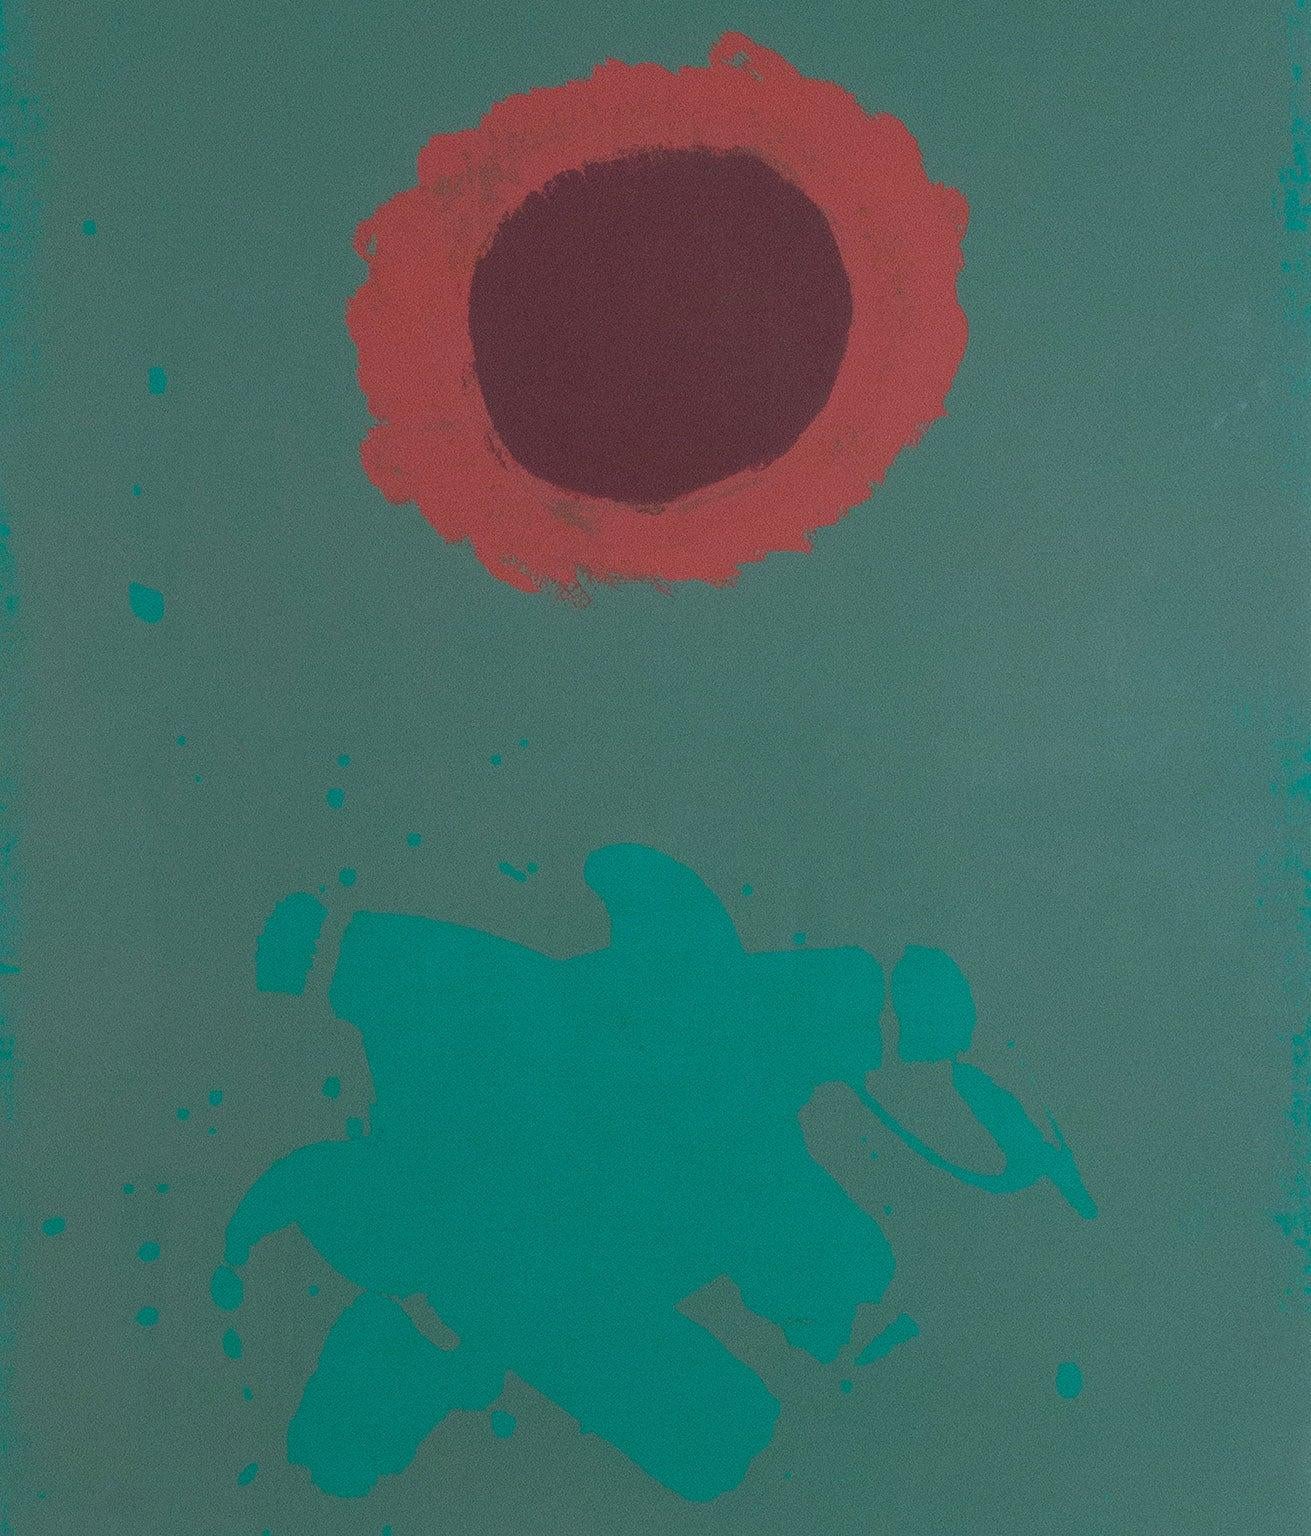 Chrome Green - Abstract Expressionist Print by Adolph Gottlieb